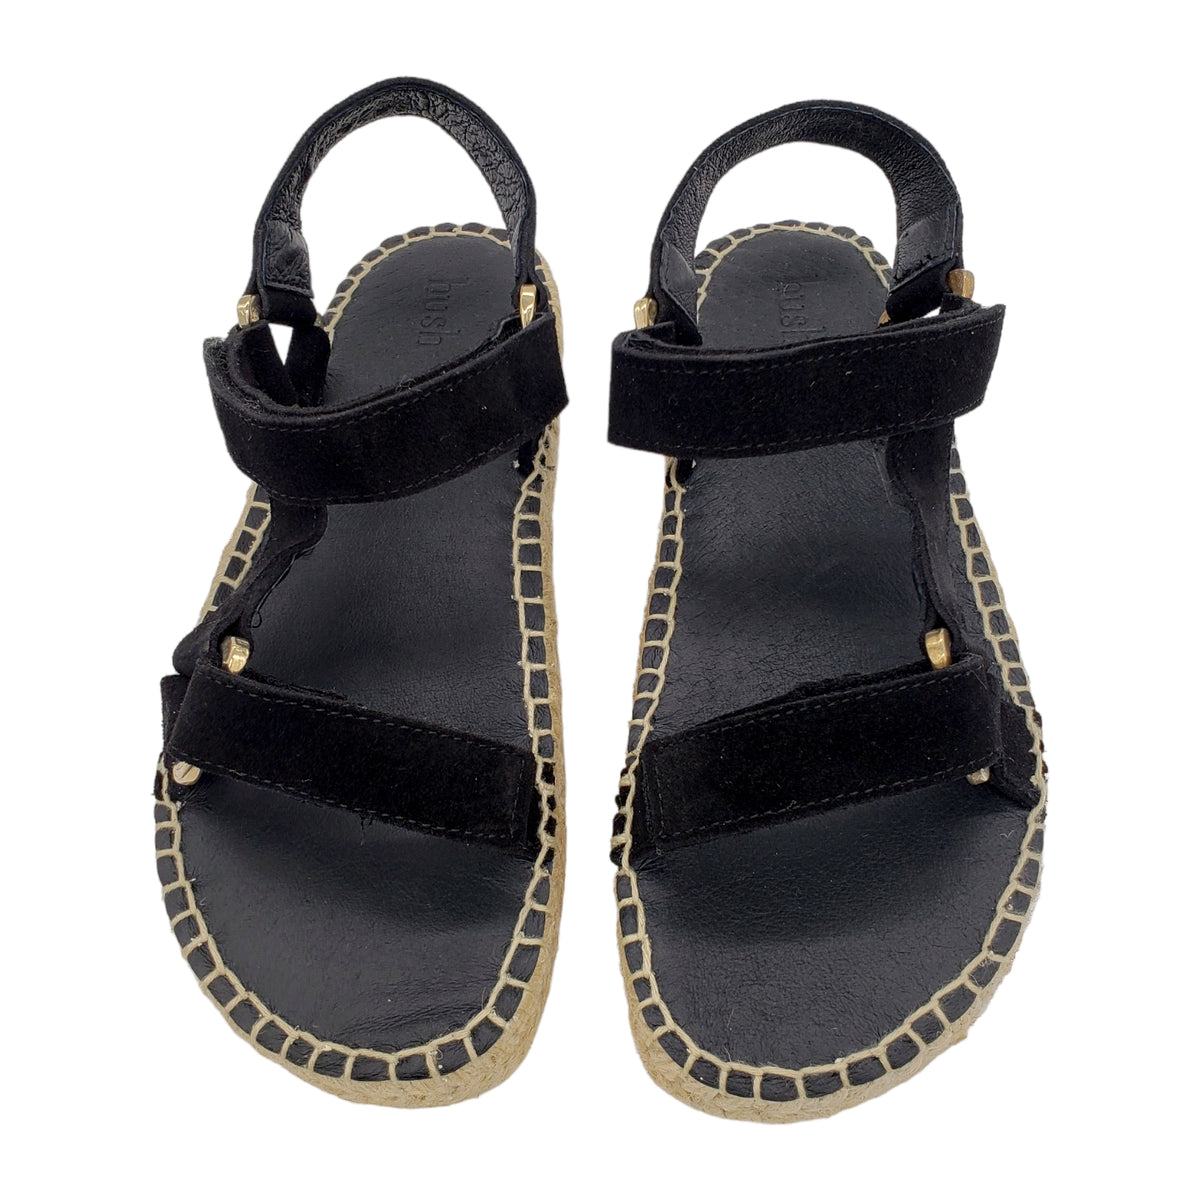 Hush Black Suede Foxhill Sandals